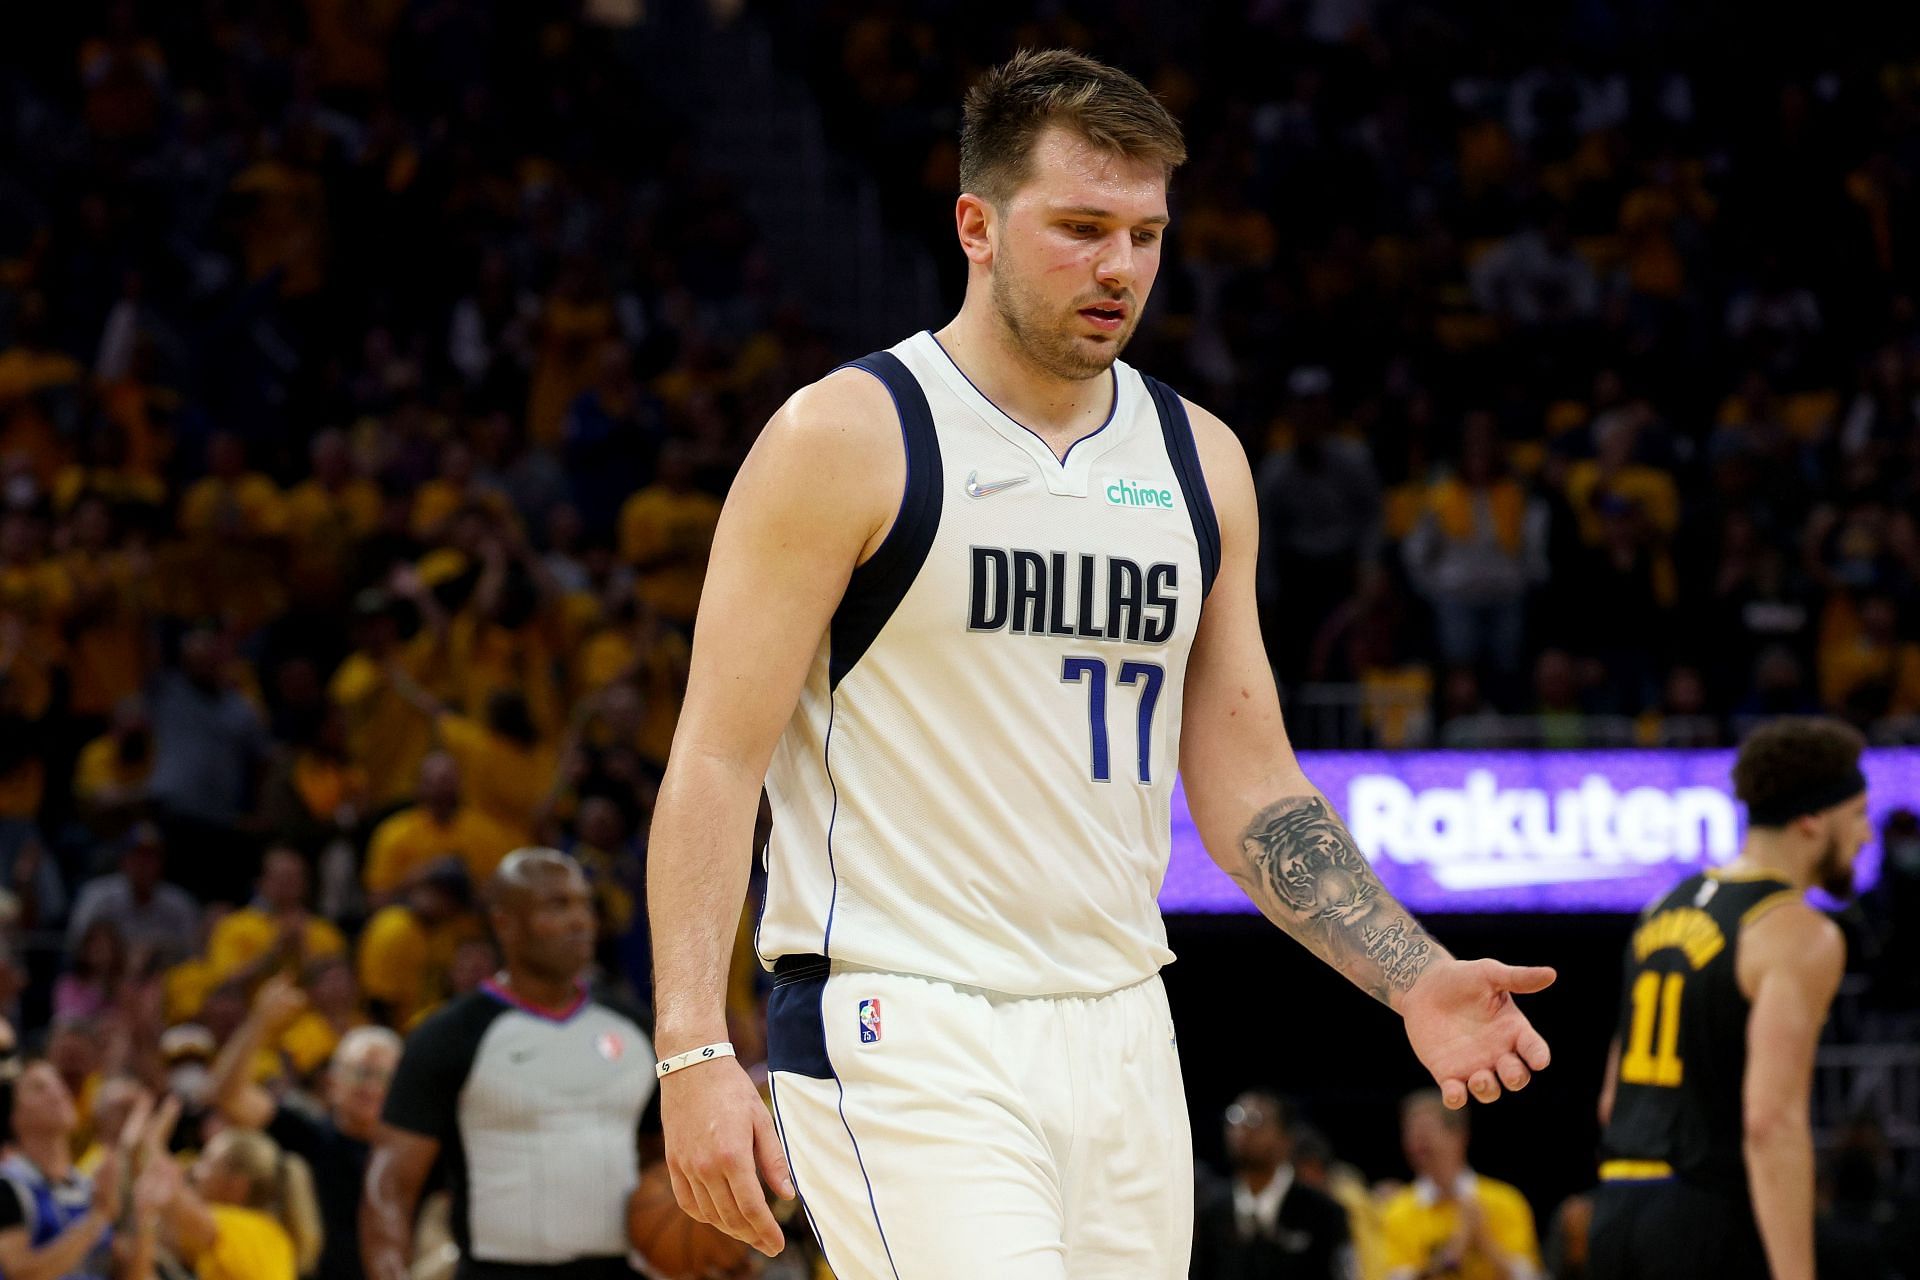 Luka Doncic of the Dallas Mavericks reacts to the Golden State Warriors during game 1 of the Western Conference finals at Chase Center on Wednesday in San Francisco, California